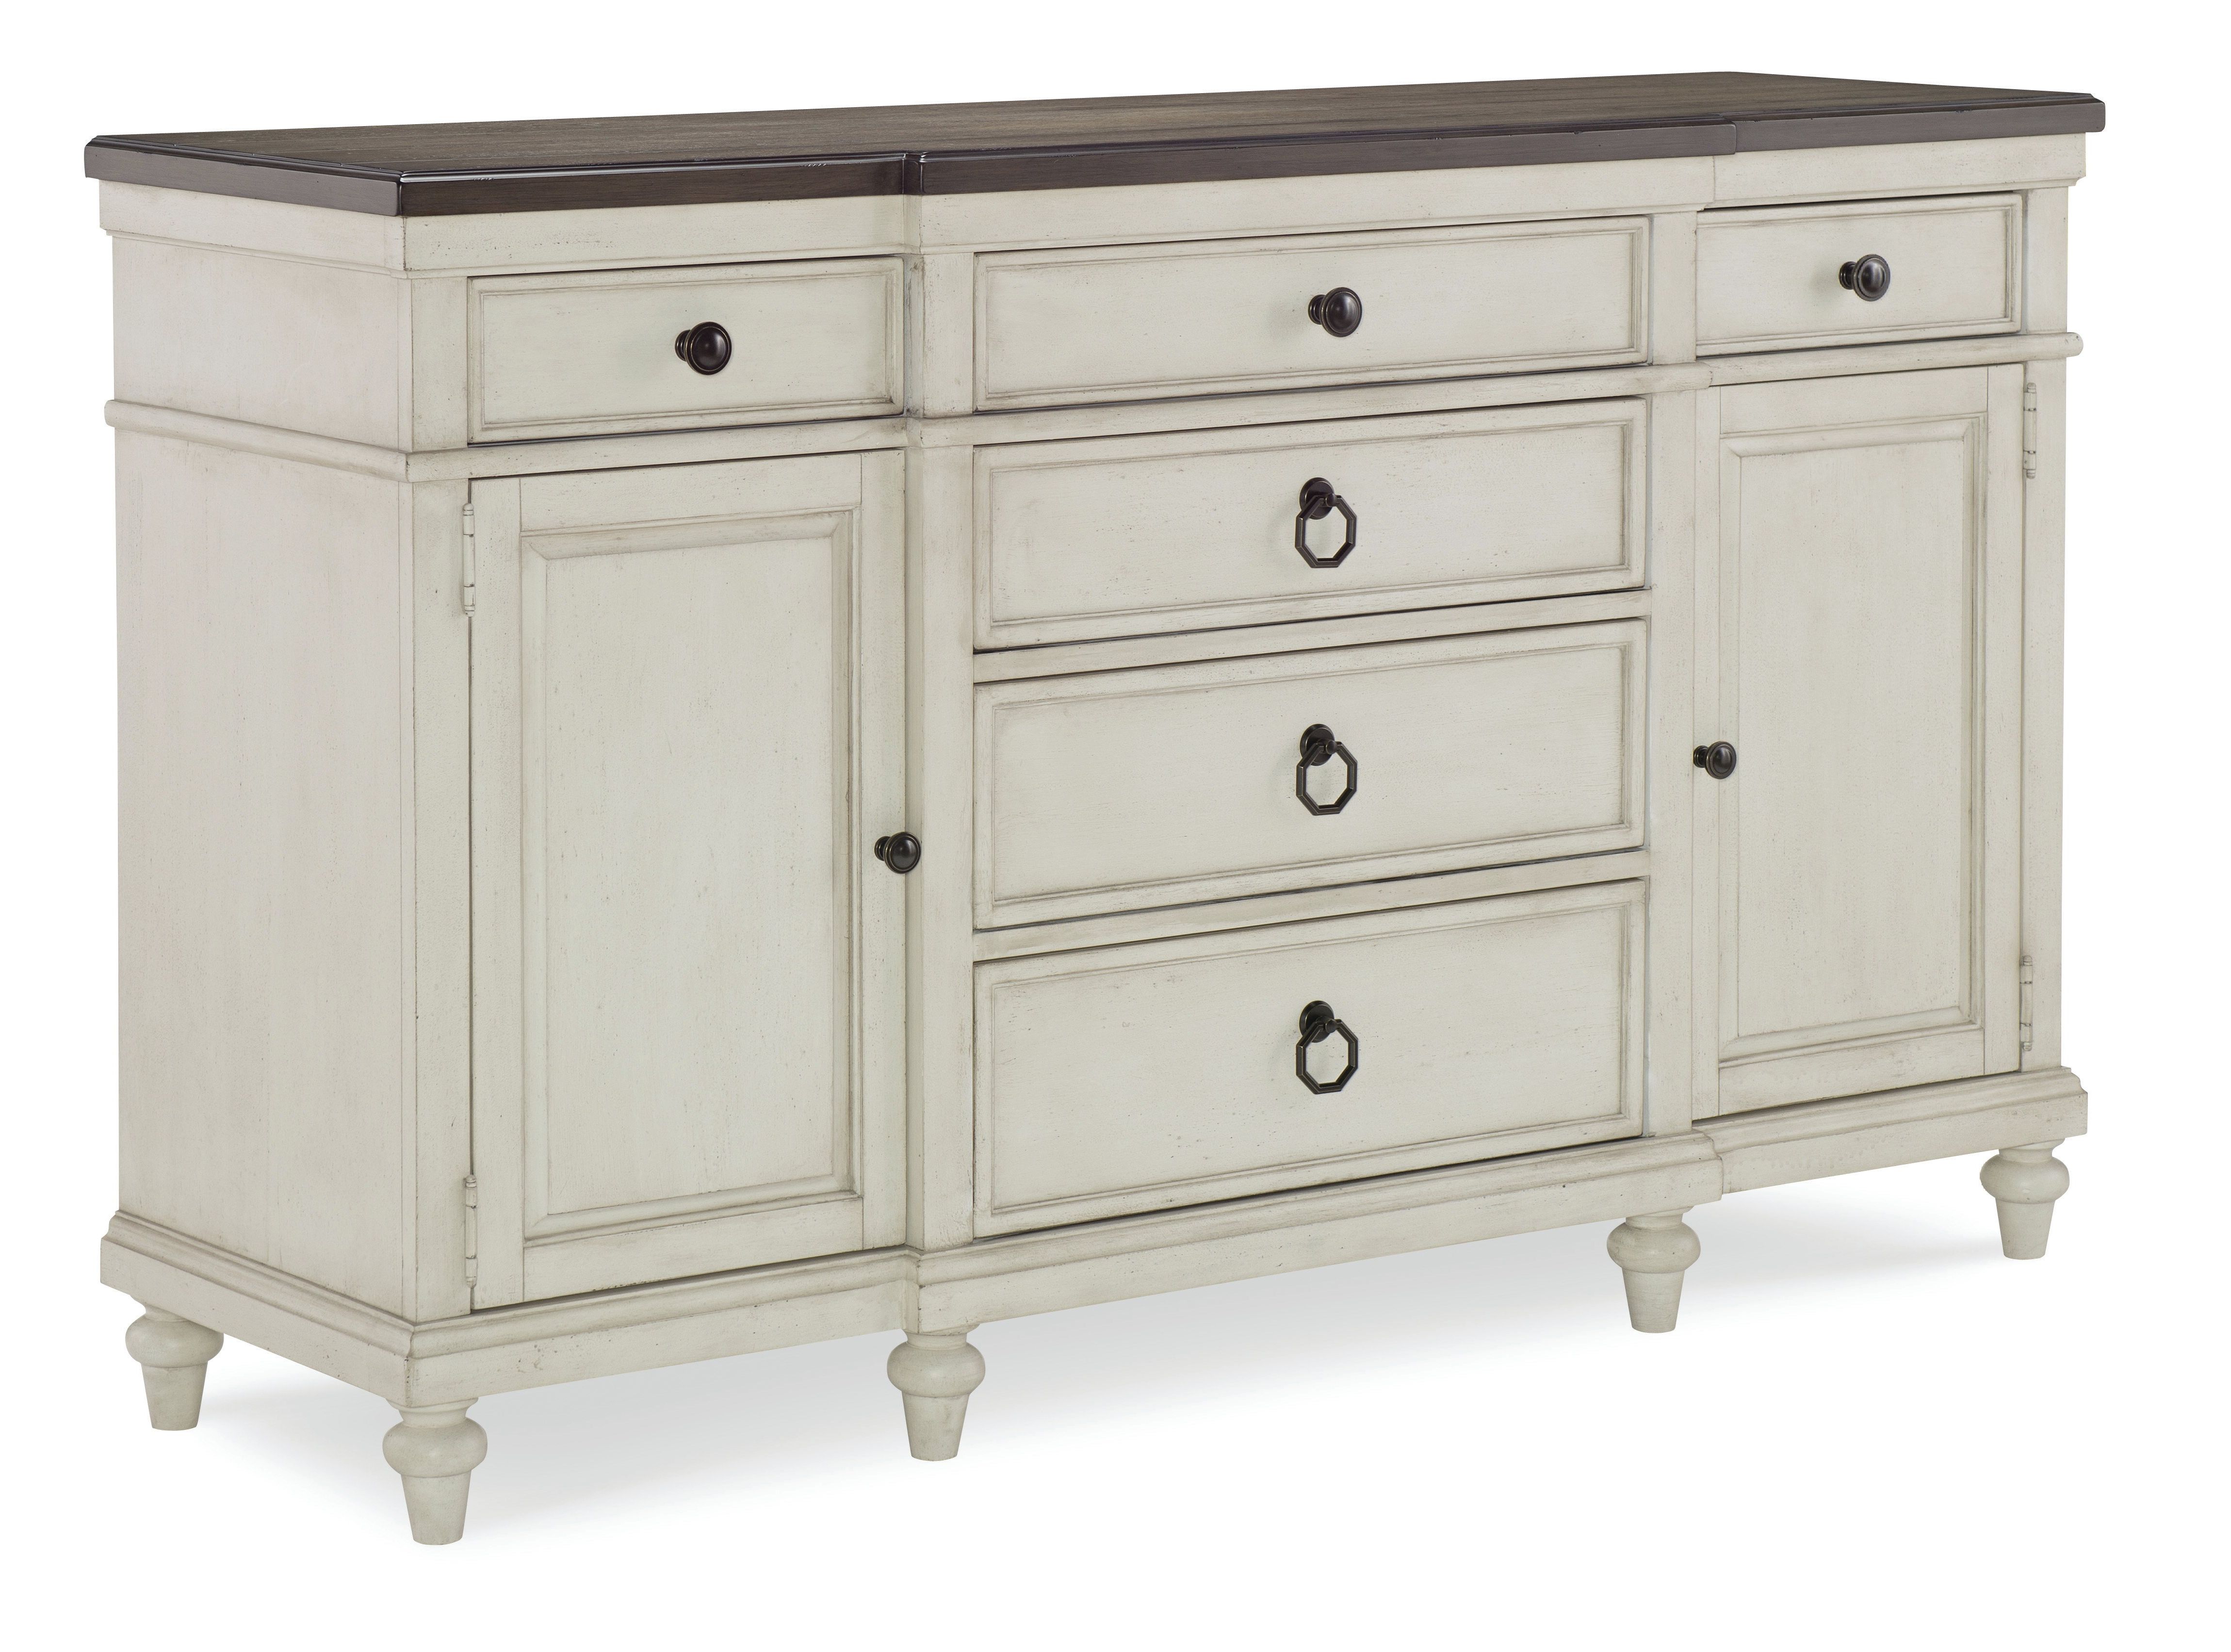 Assembled Sideboards & Buffets | Joss & Main Intended For Hewlett Sideboards (View 18 of 20)